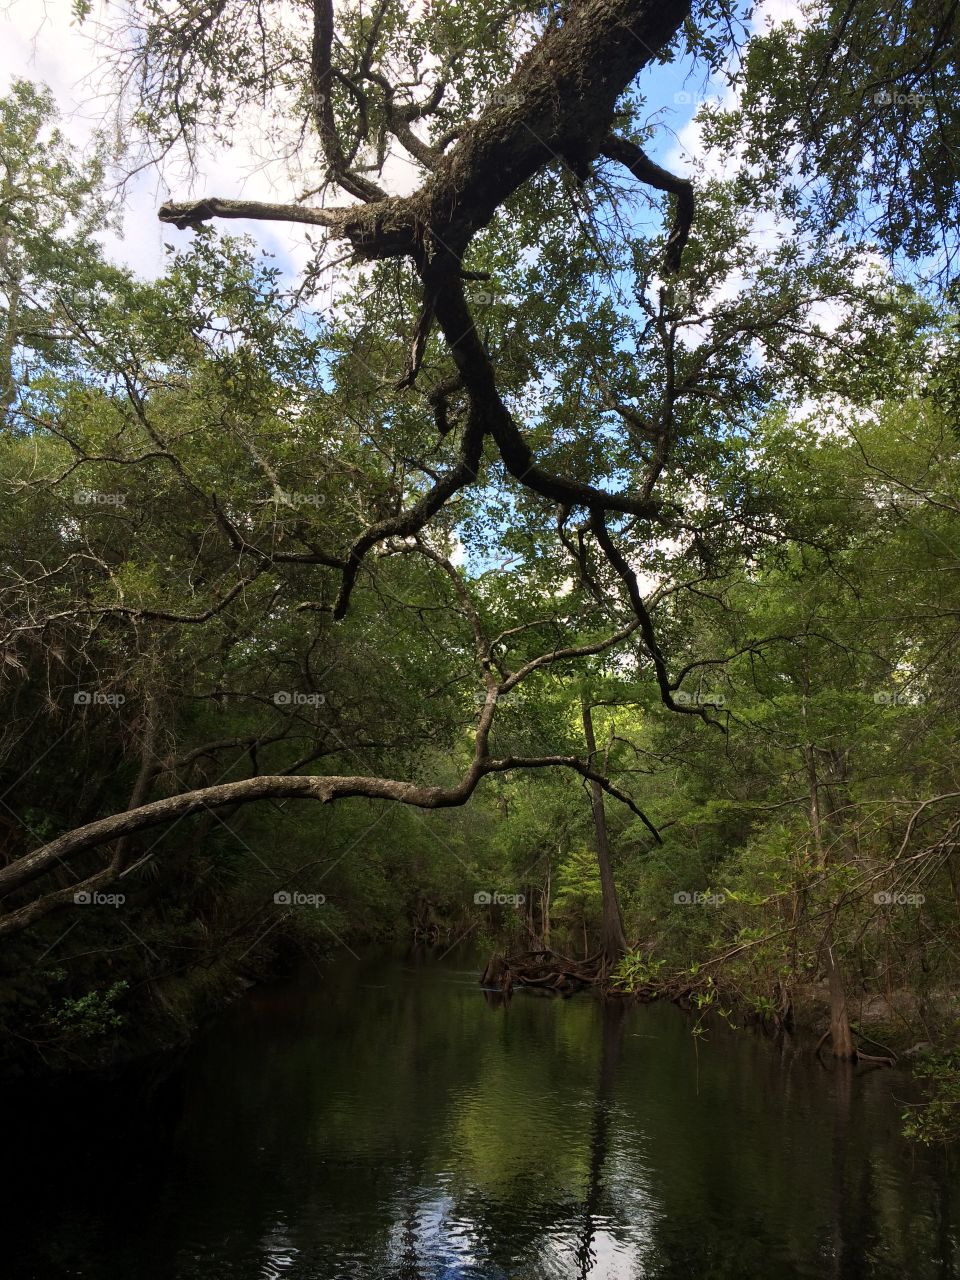 In The Jungle. Hiking along the Sopchoppy River in the Apalachicola National Forest on the famous Florida Trail.